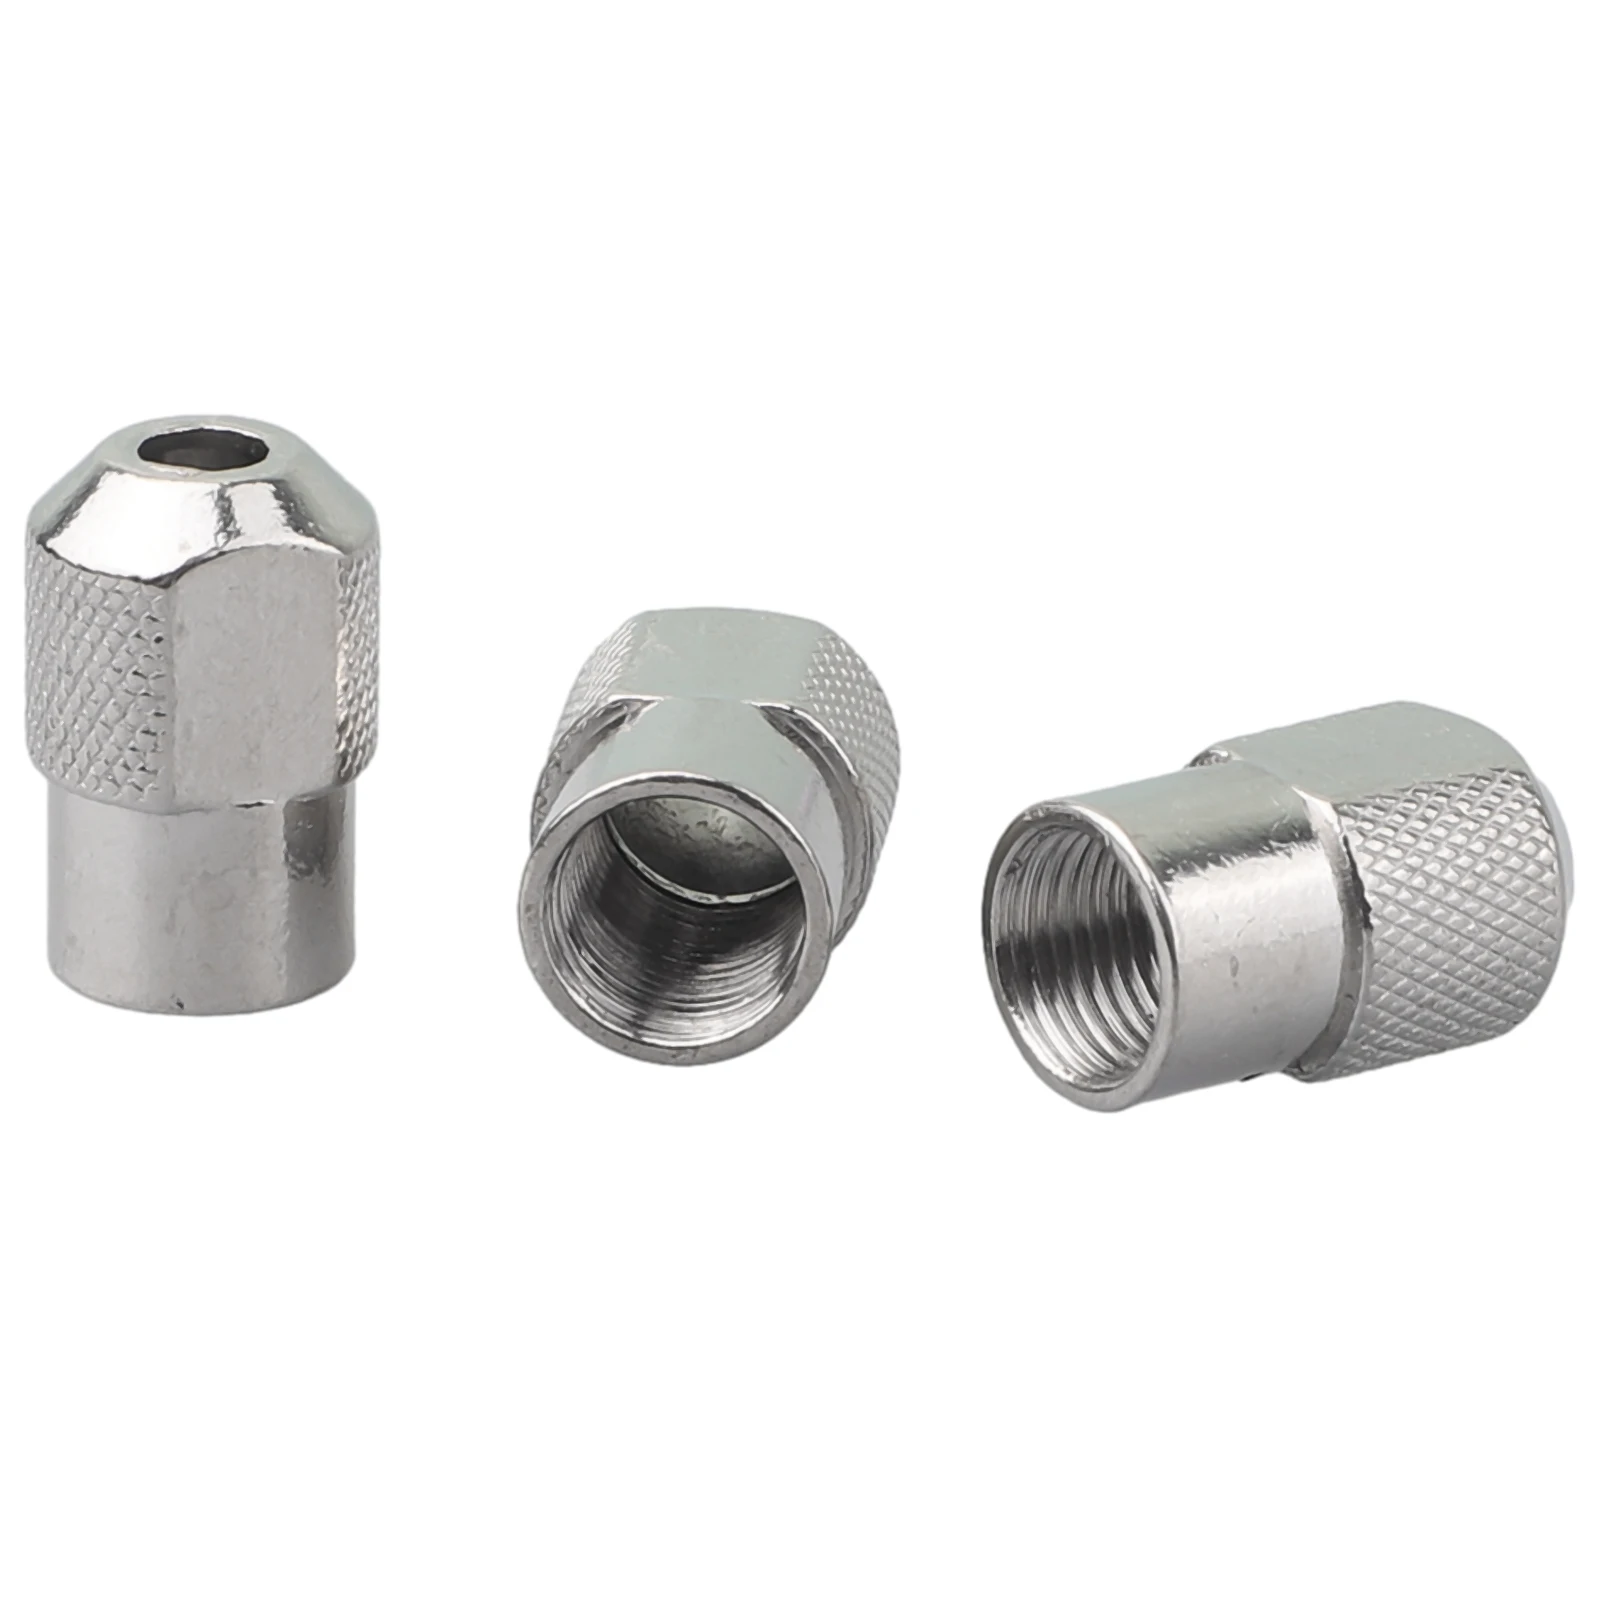 

Grinder Chuck Nuts Garden Home 3pcs Easy To Install Save Time Zinc Alloy For 8*0.75mm Electric Grinder Brand New